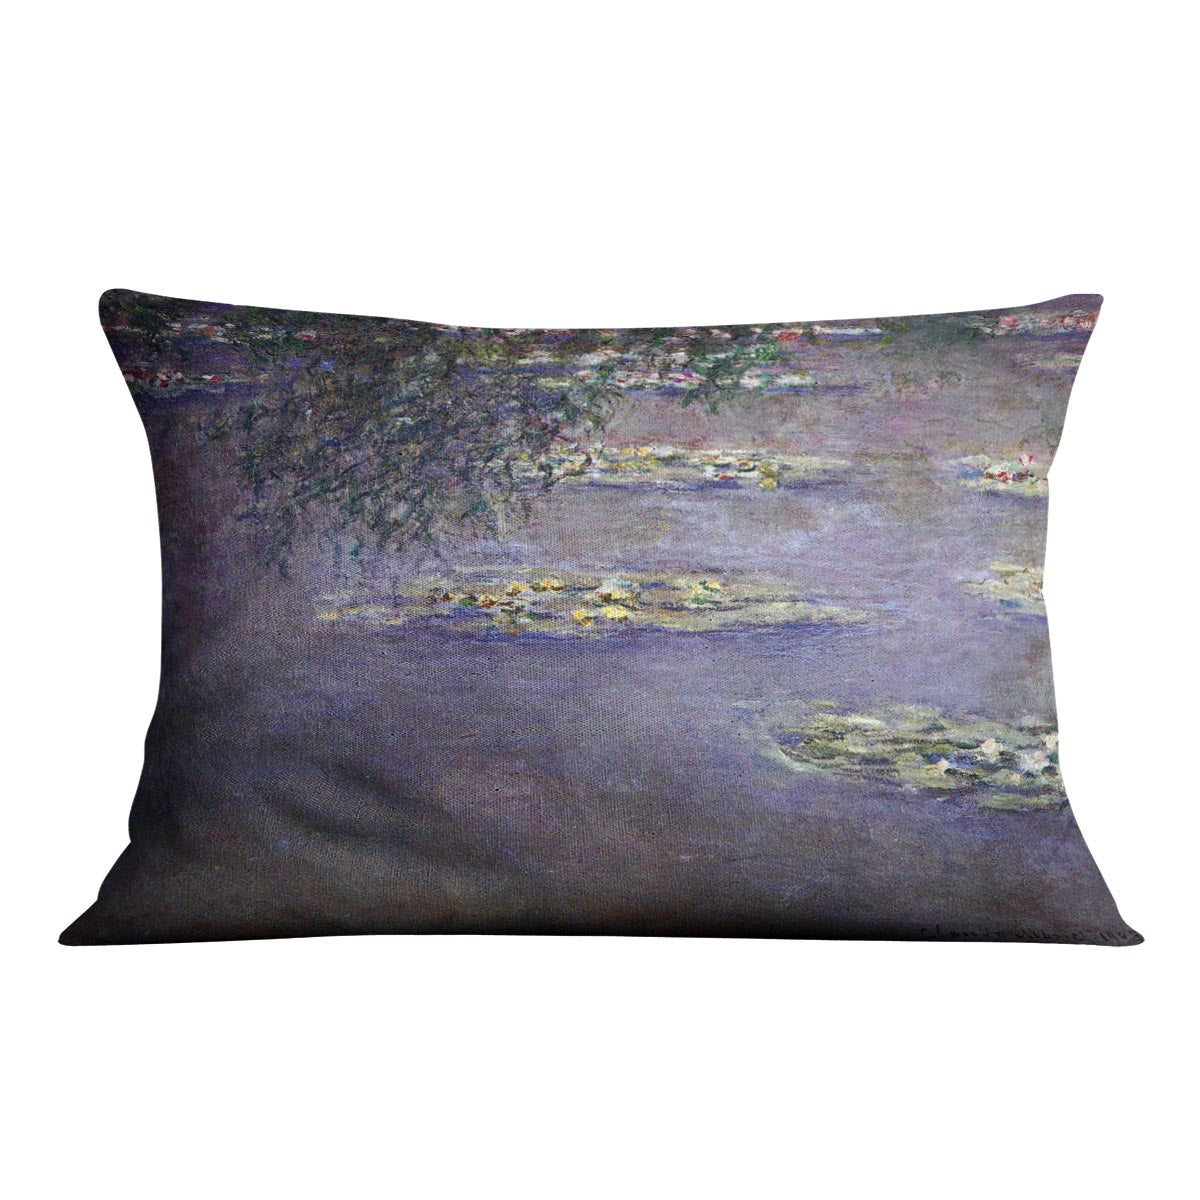 Water lilies water landscape 1 by Monet Cushion